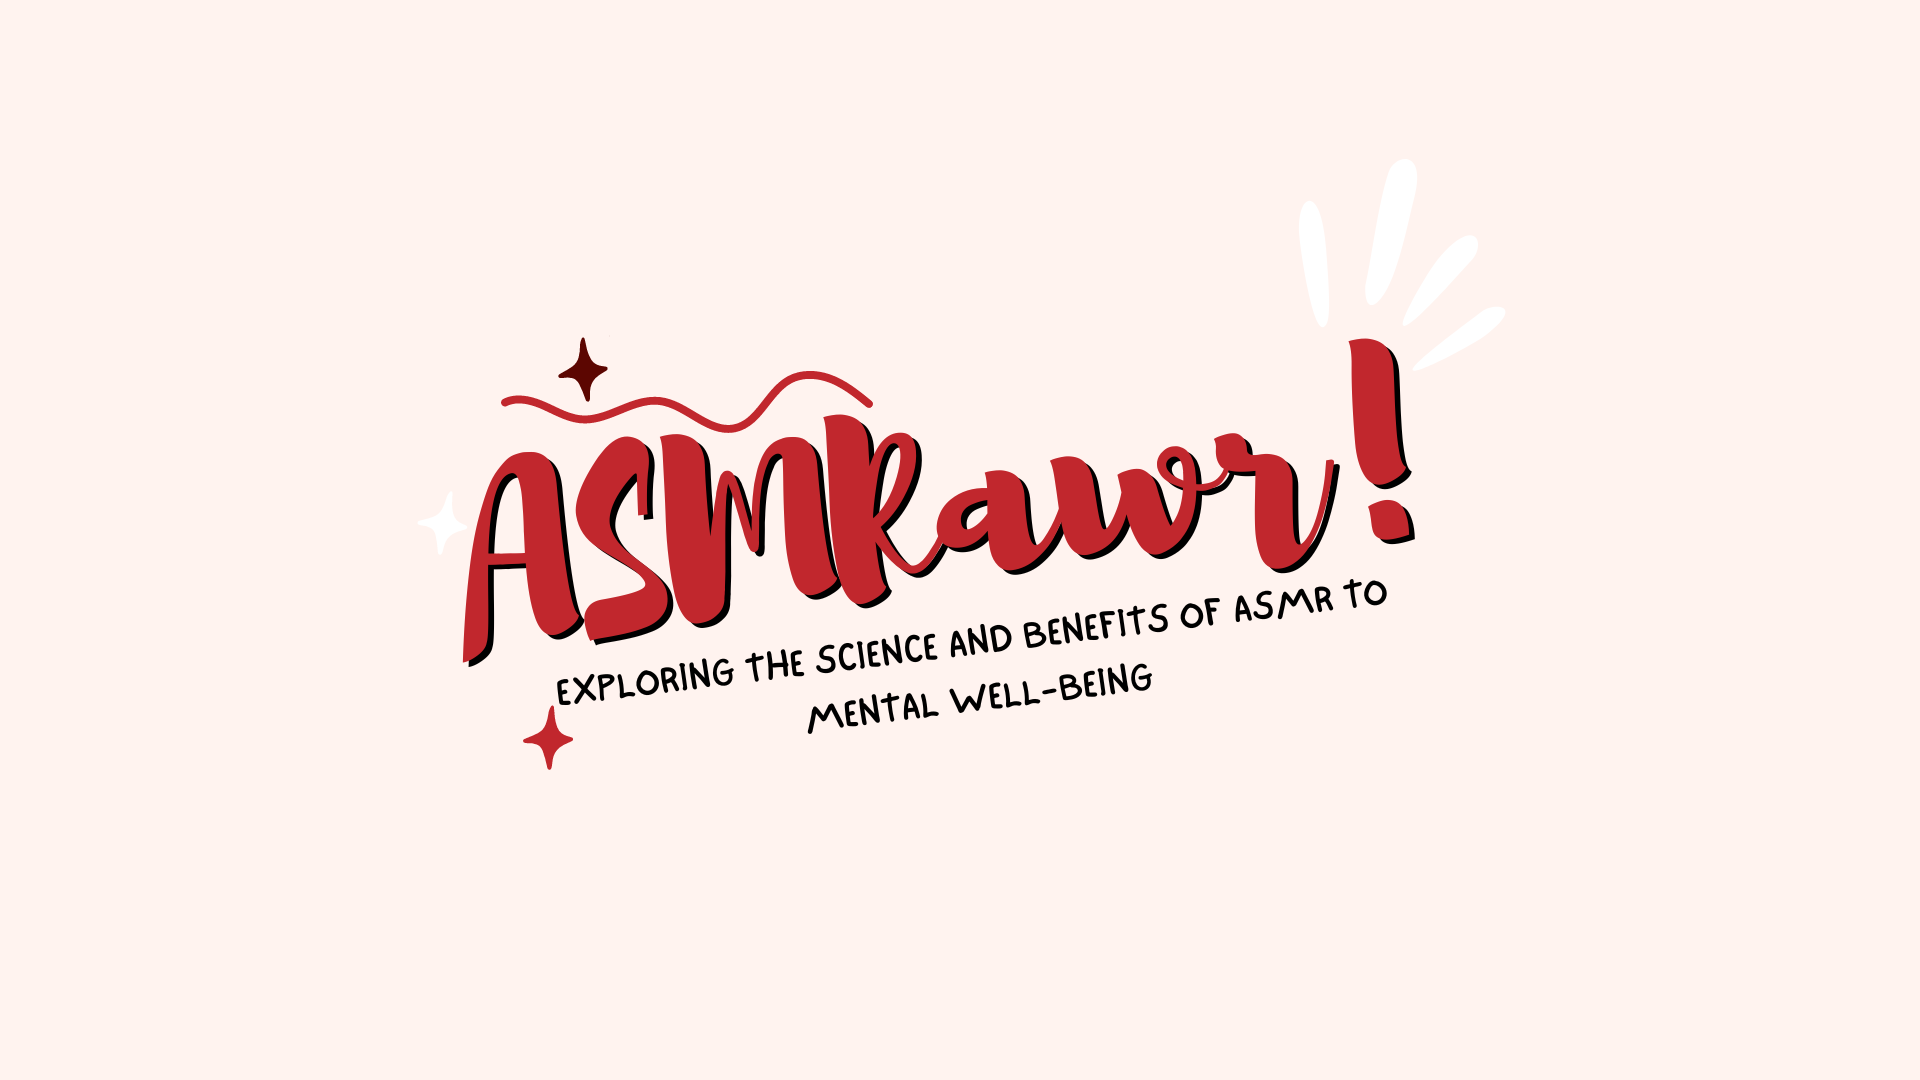 ASMRawr!: Exploring the Science and Benefits of ASMR to Mental Well-being